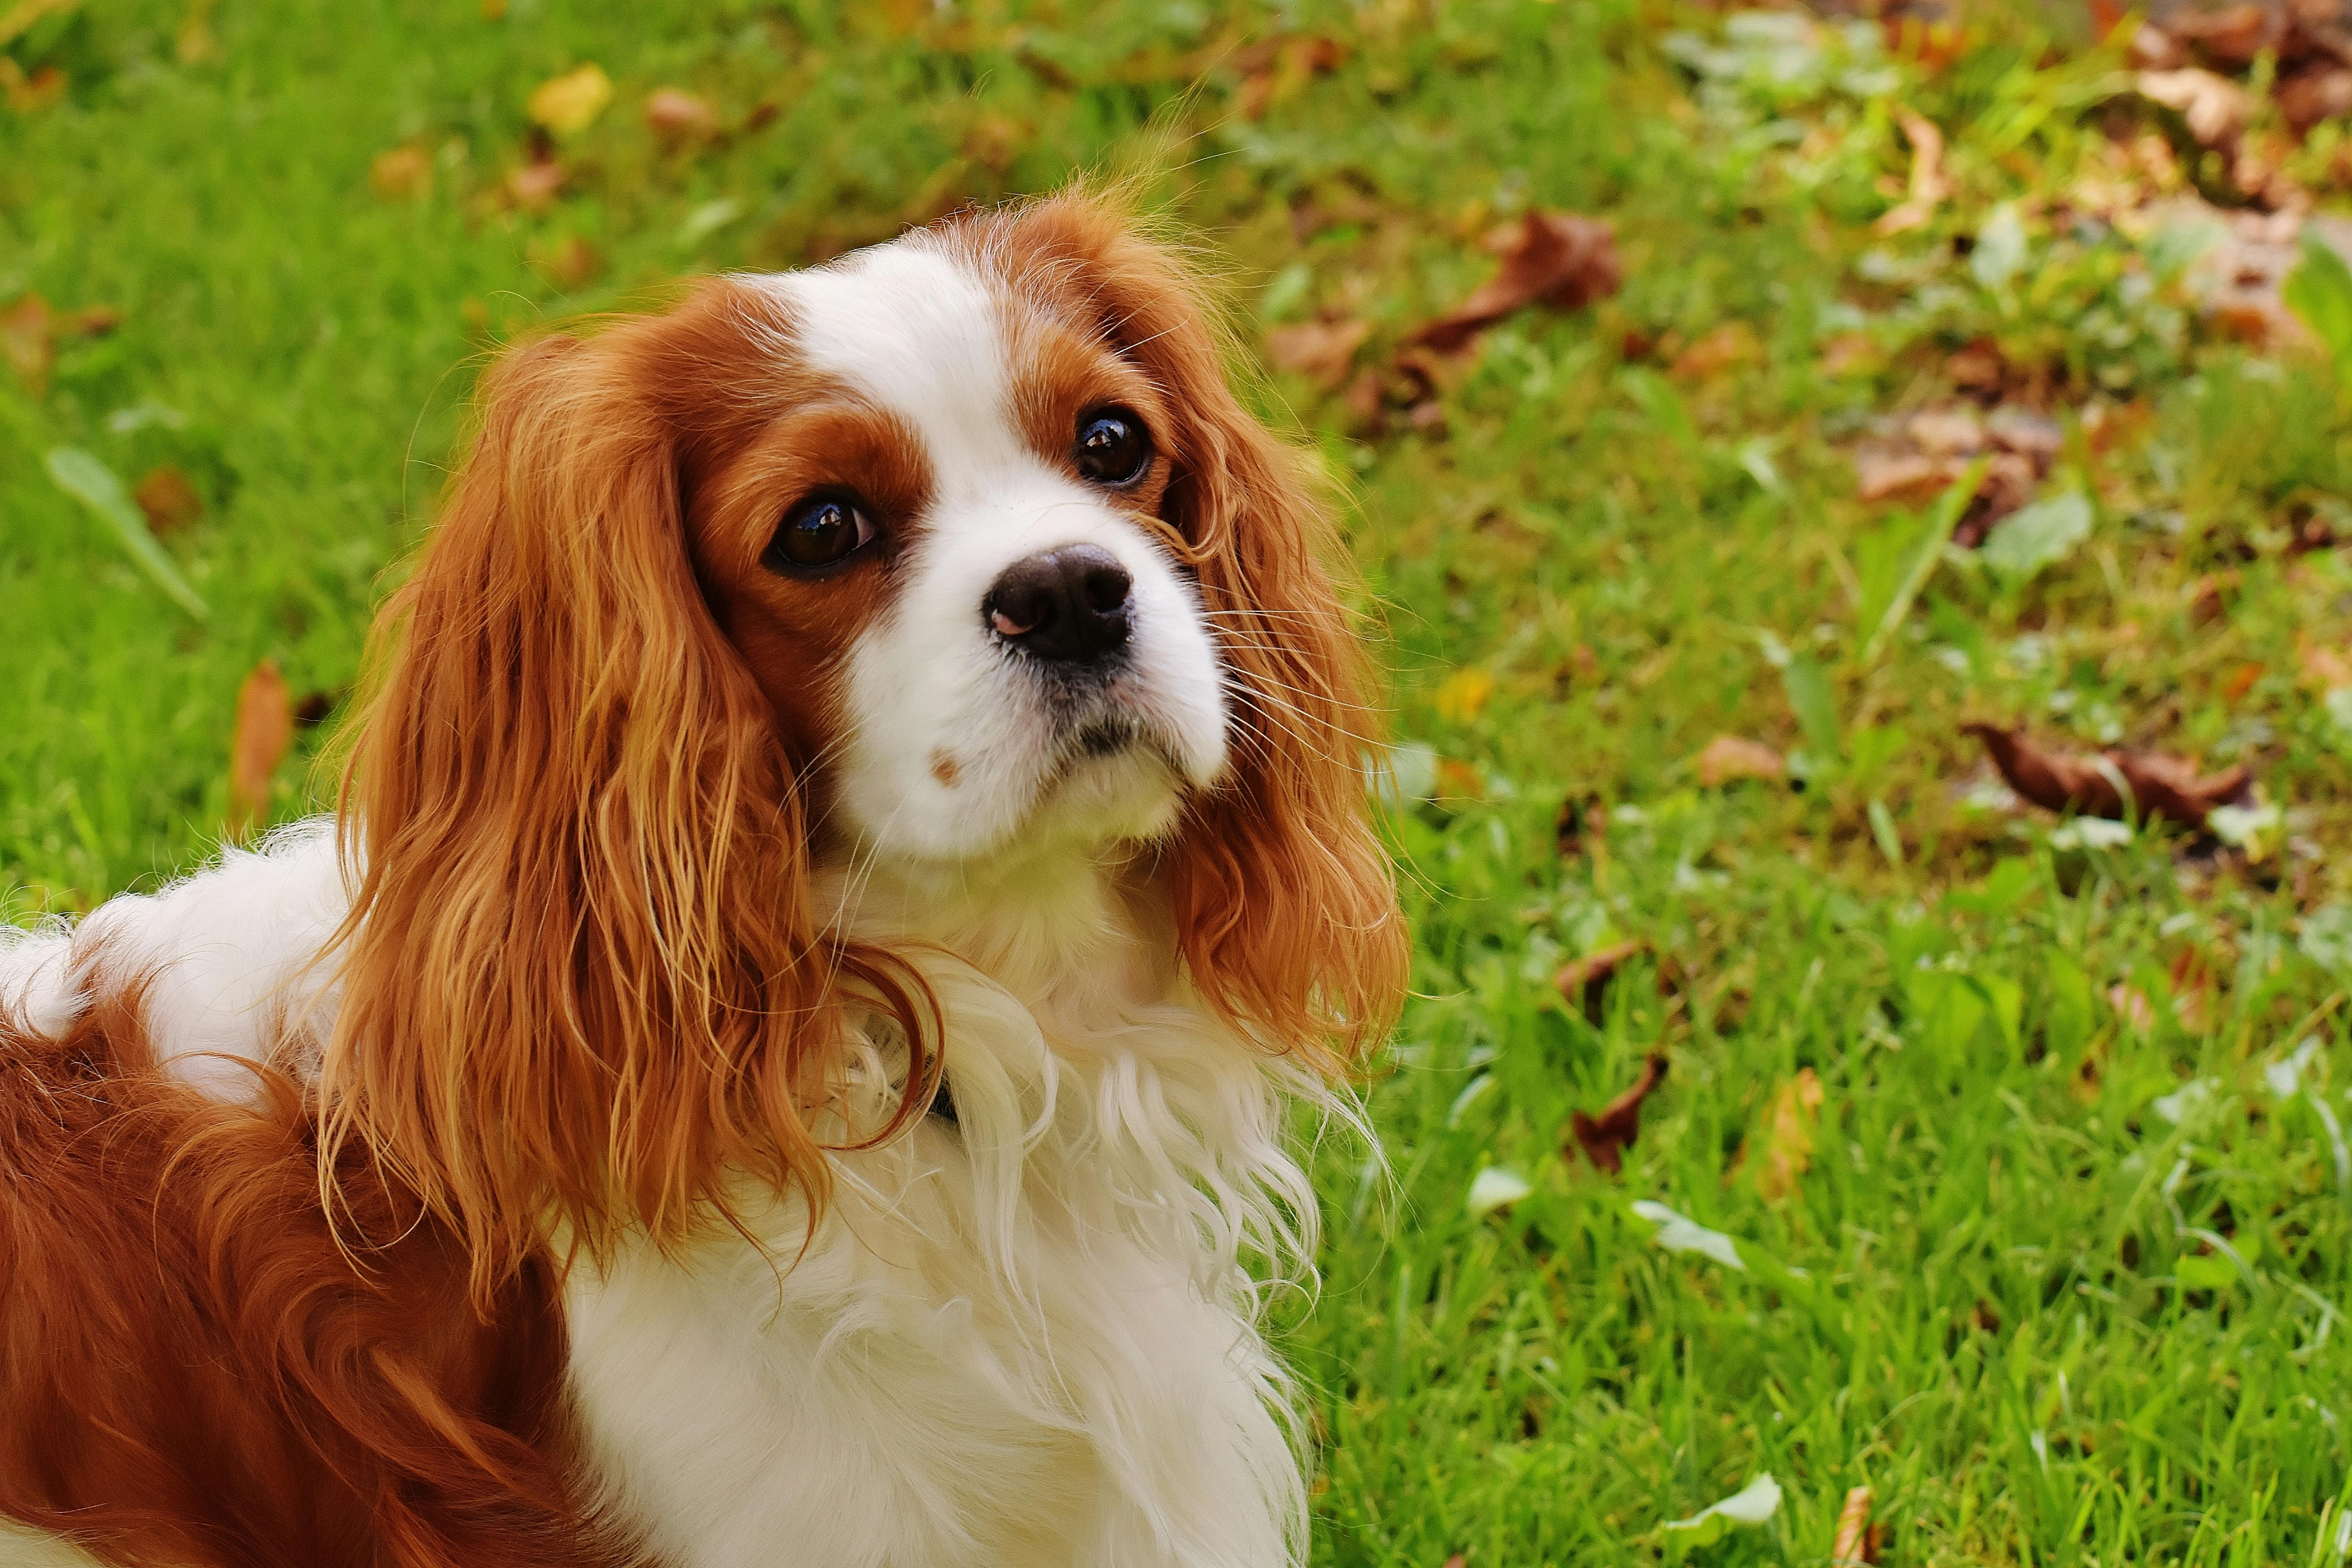 Red and White Cavalier King Charles Spaniel Lying on Green Grass during Daytime · Free Stock Photo